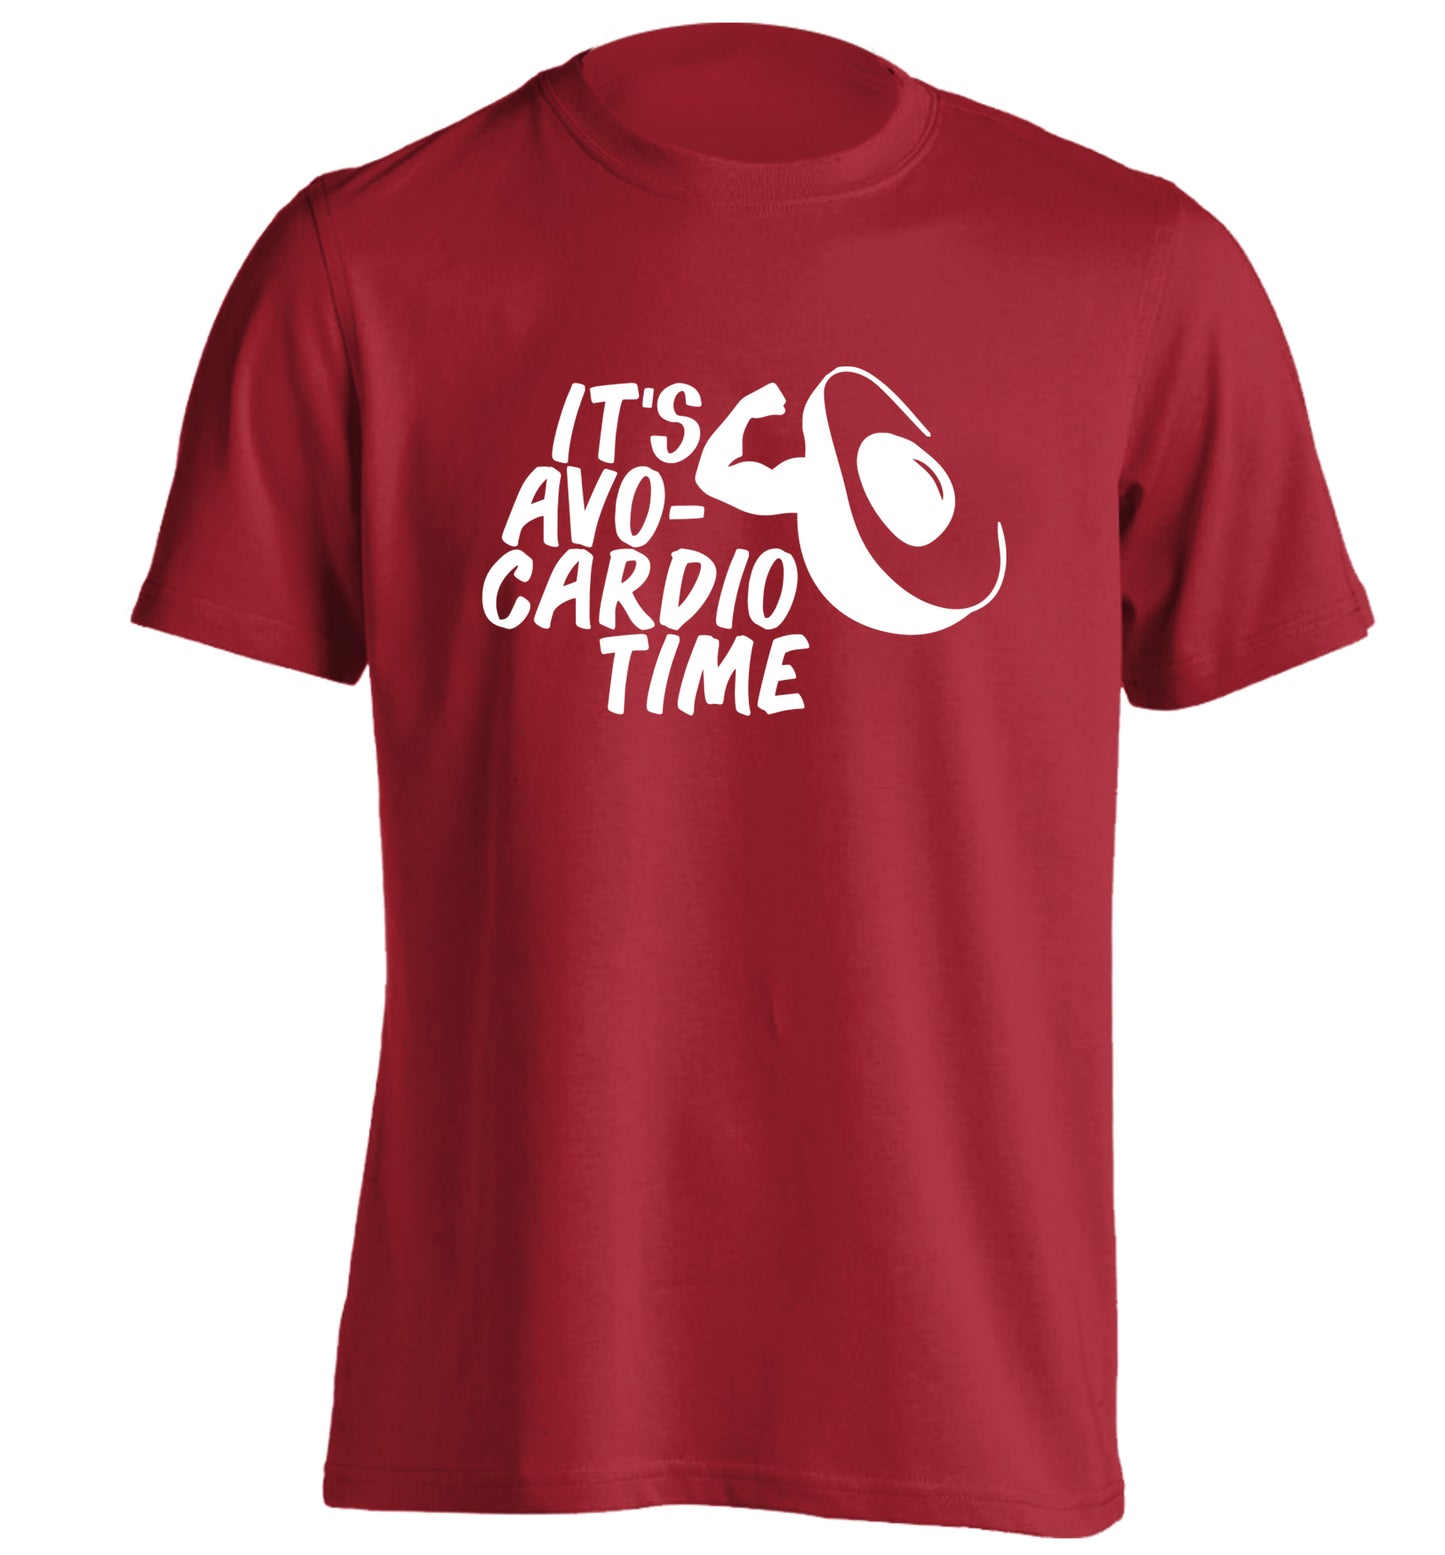 It's avo-cardio time adults unisex red Tshirt 2XL